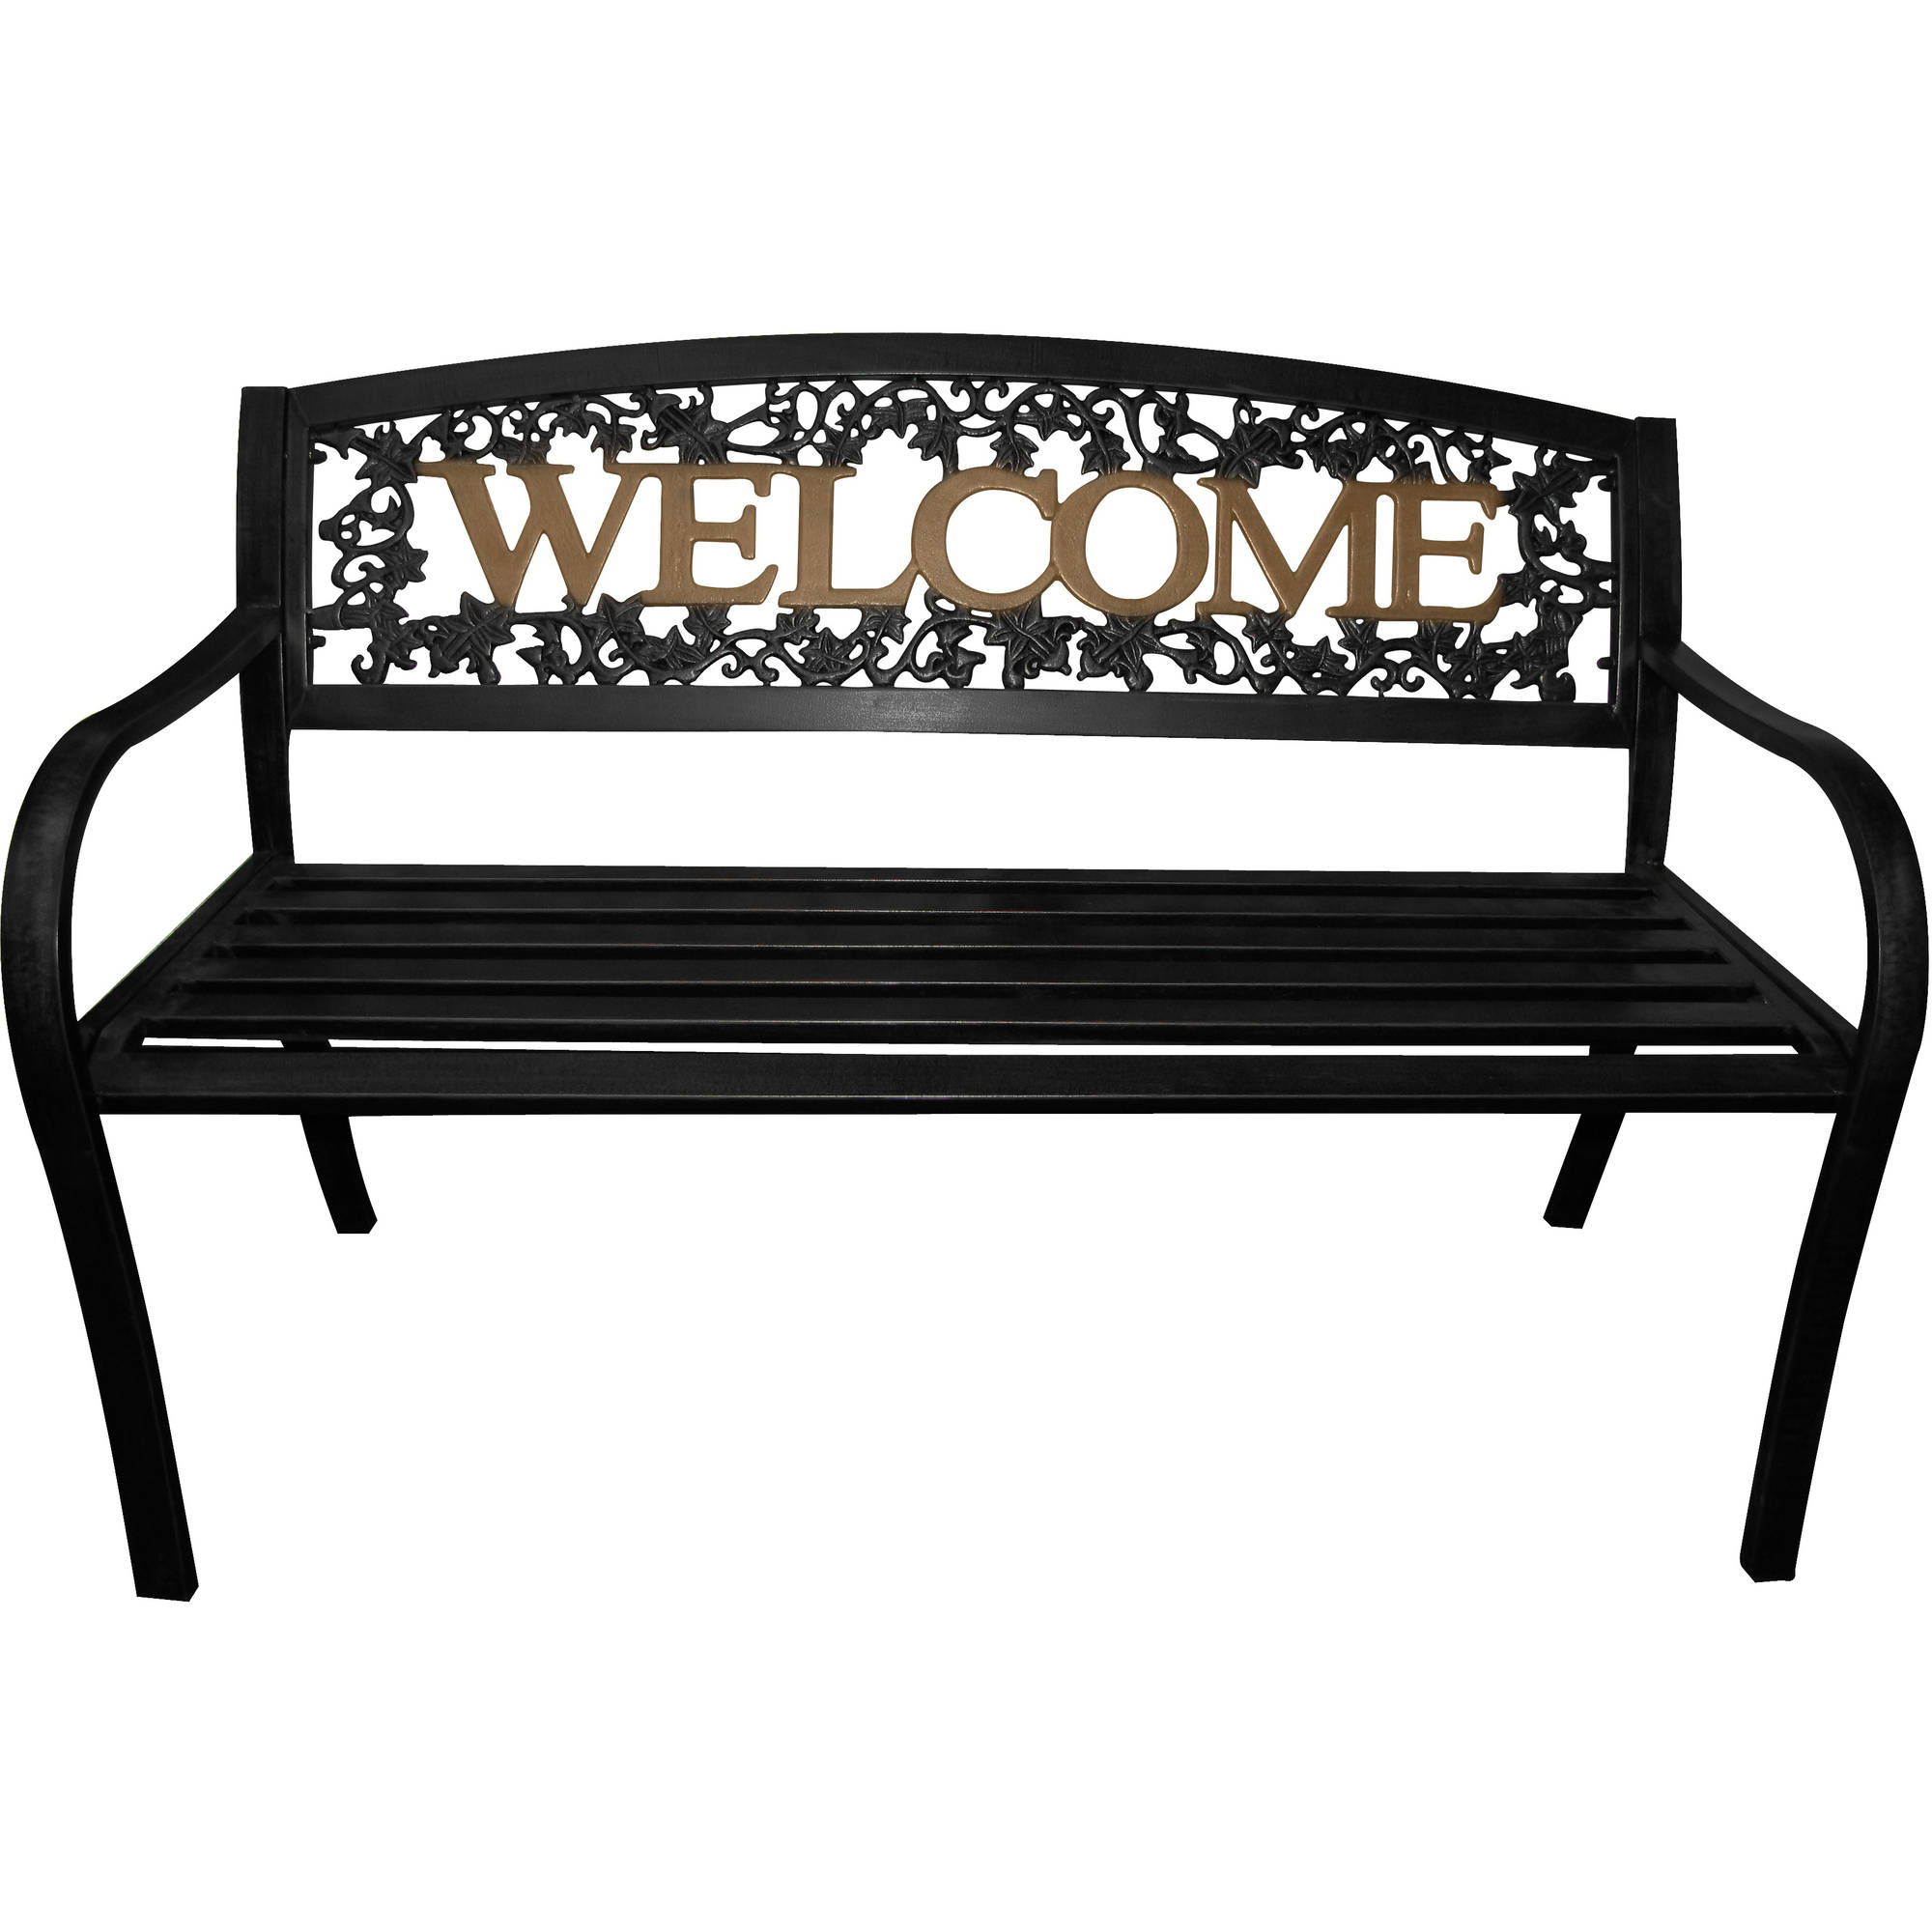 Leigh Country TX 94108 Adult Outdoor Metal Welcome Patio Bench - Black and Gold - image 4 of 5